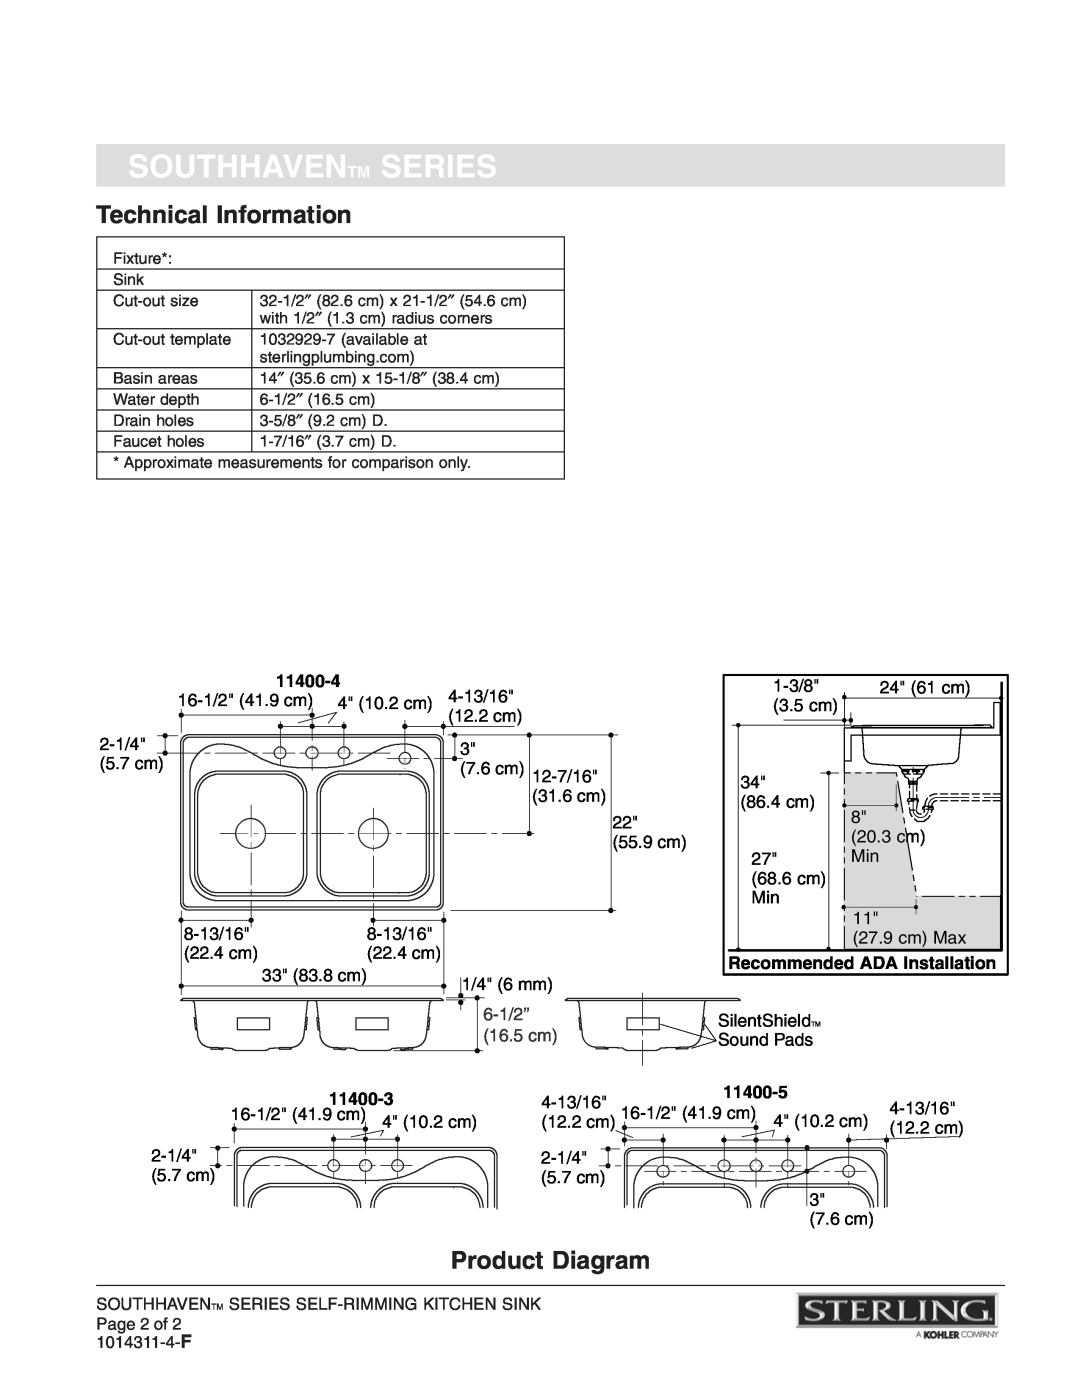 Sterling Plumbing Technical Information, Product Diagram, Southhaventm Series, 11400-4, Recommended ADA Installation 